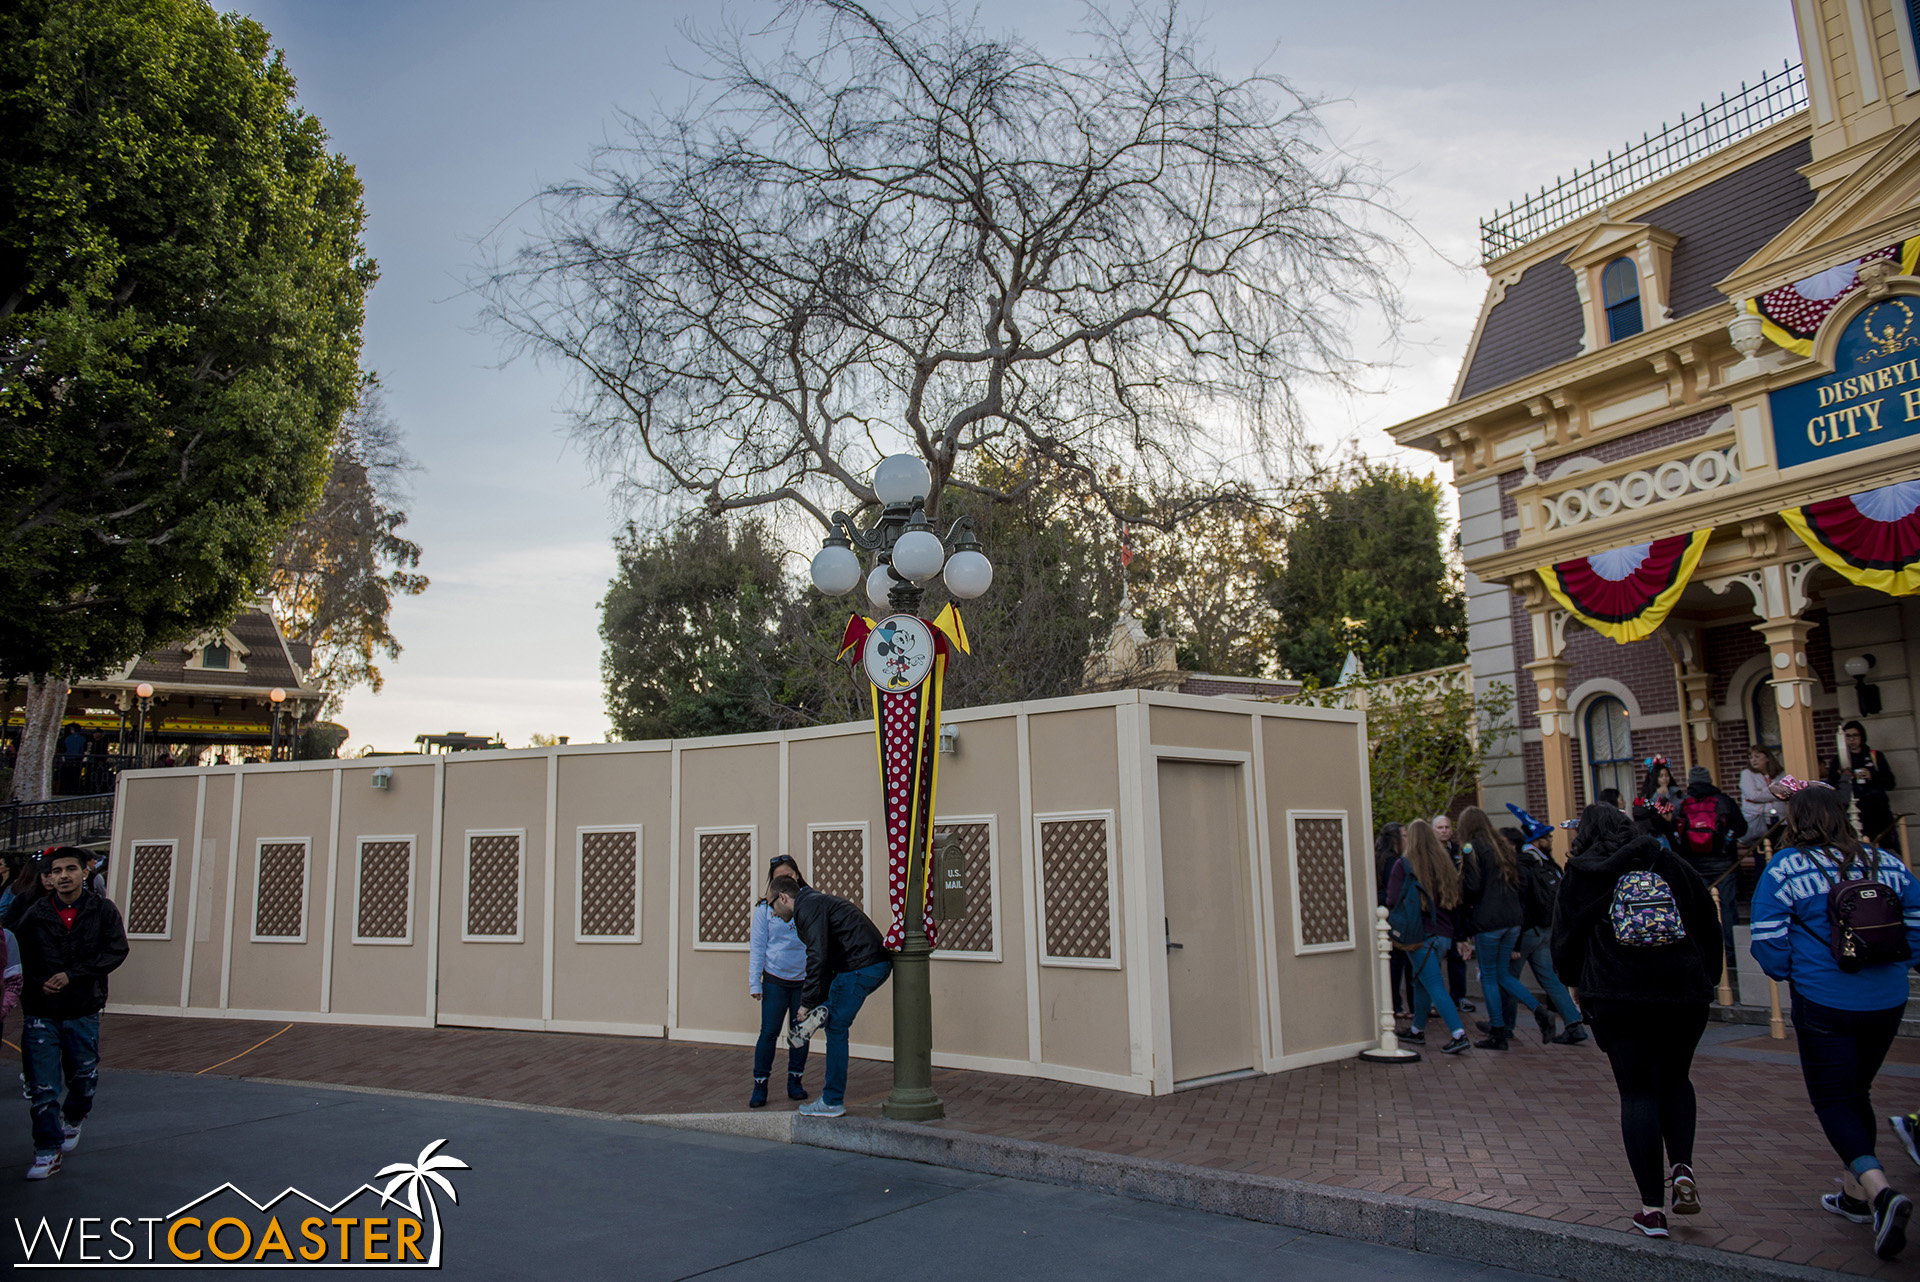  After outfitting the curb with ramp cuts at Main Street’s Town Square, they walled off the middle portion of the pavement to hide all the bodies that have perished working on “Star Wars” Land. 